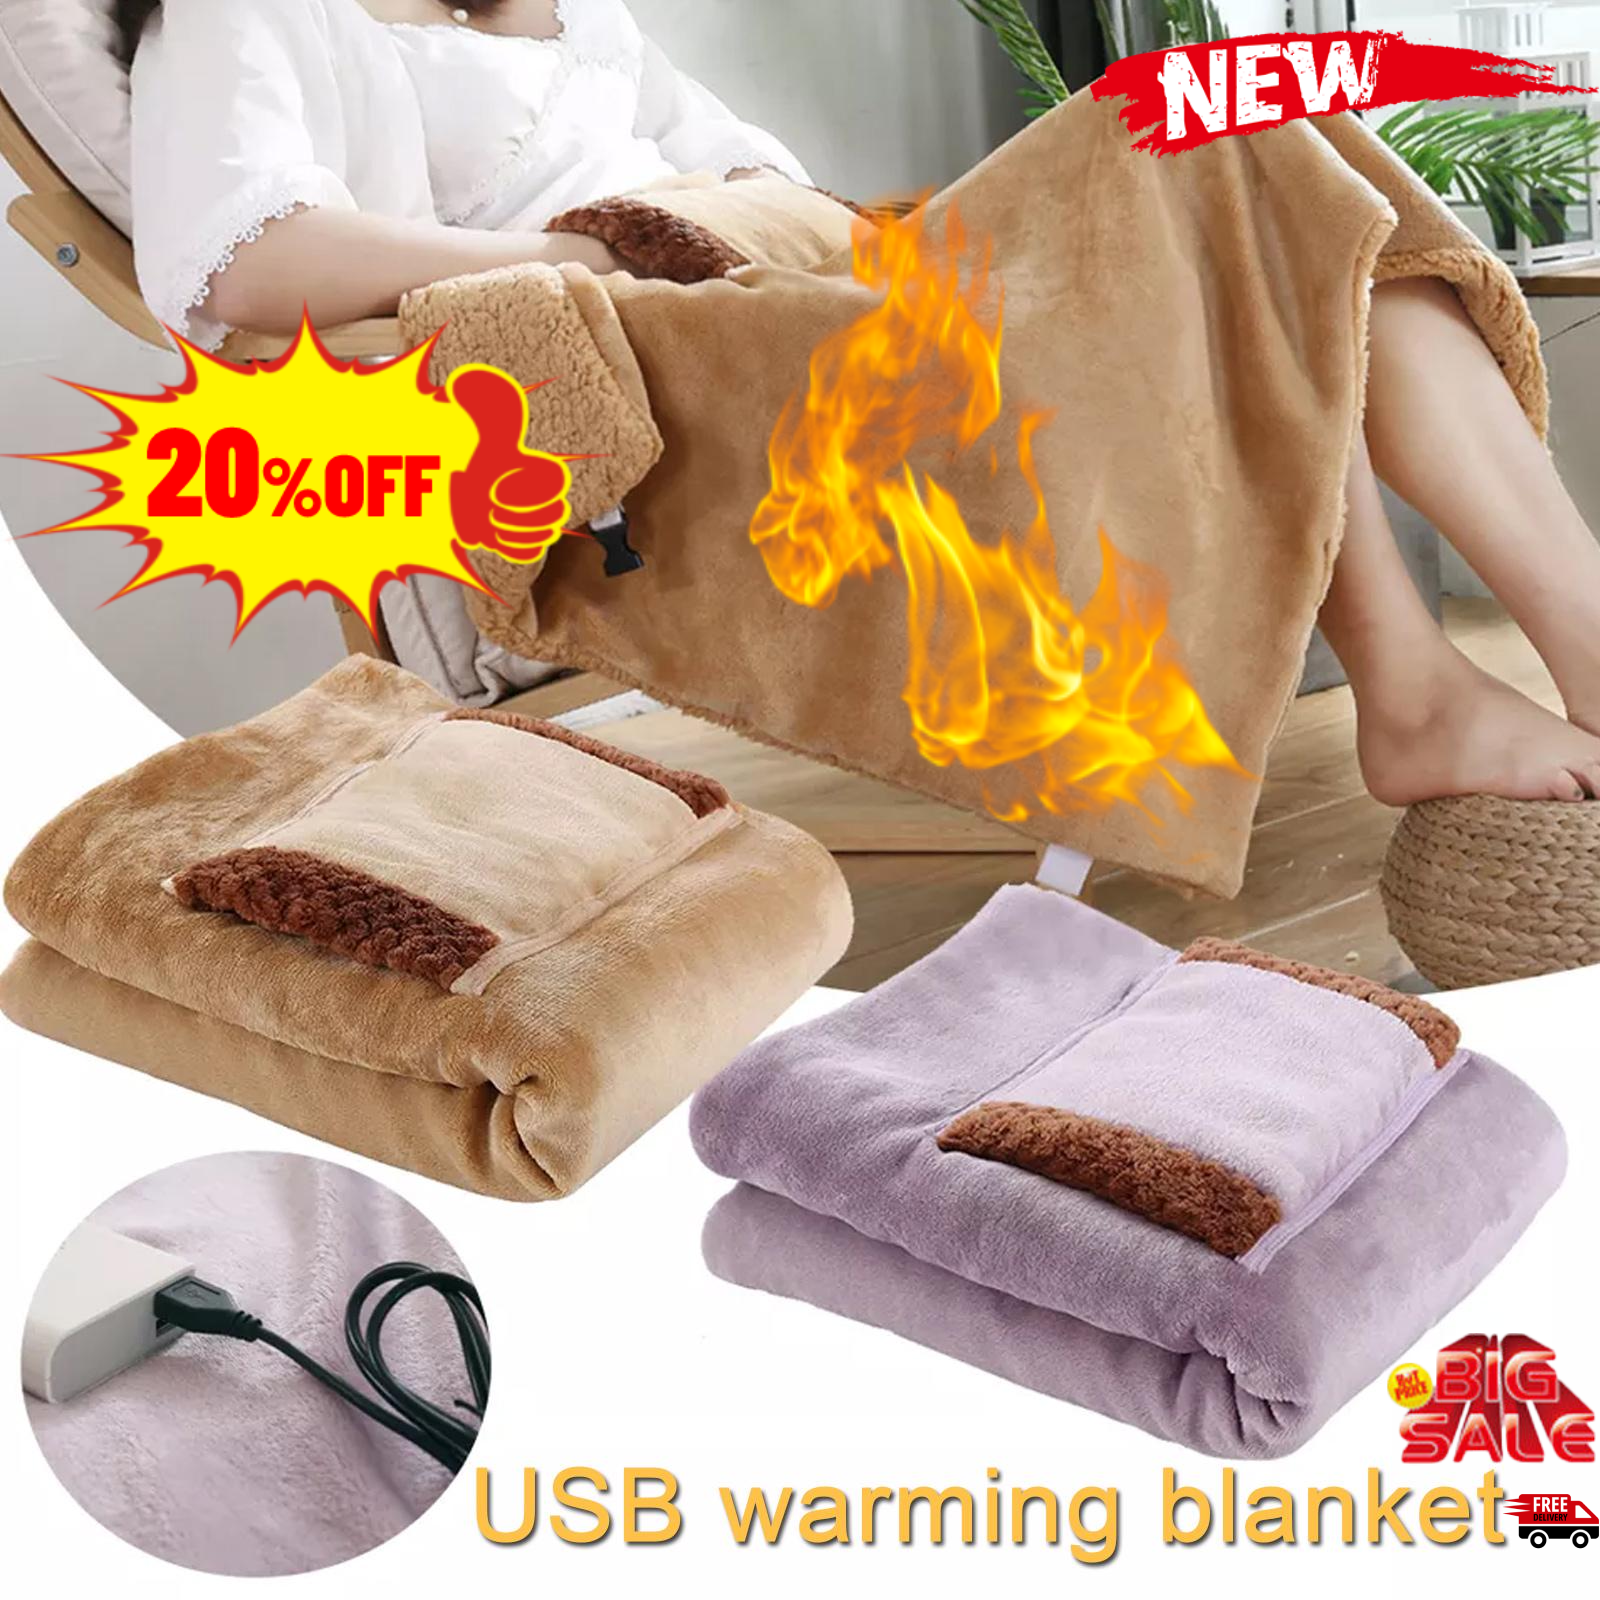 Heated Blanket Electric Throw, Usb Electric Blanket Double Warm